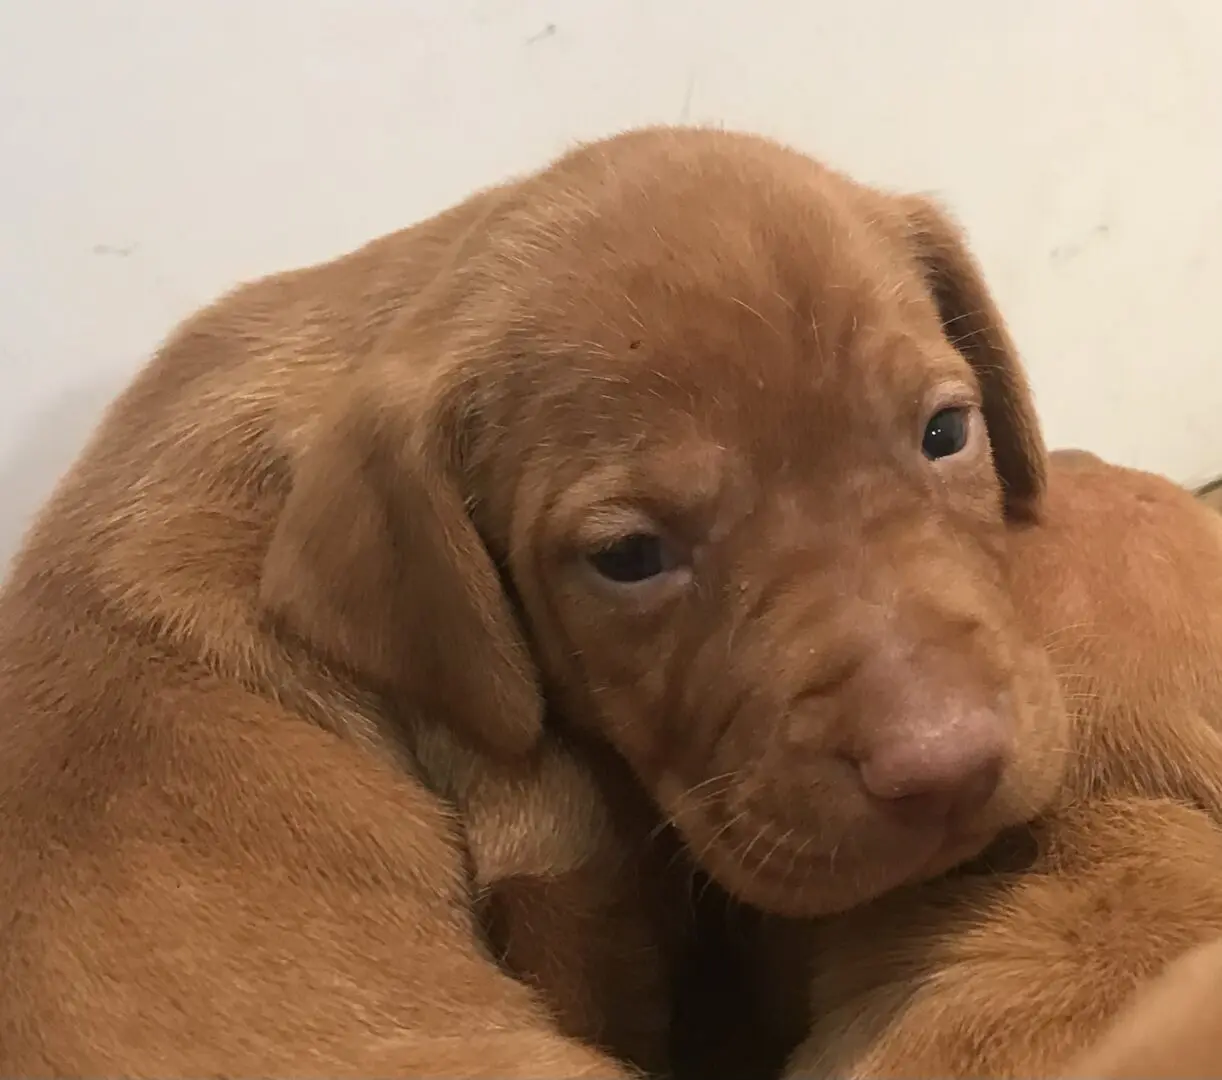 a close-up photo of a brown puppy